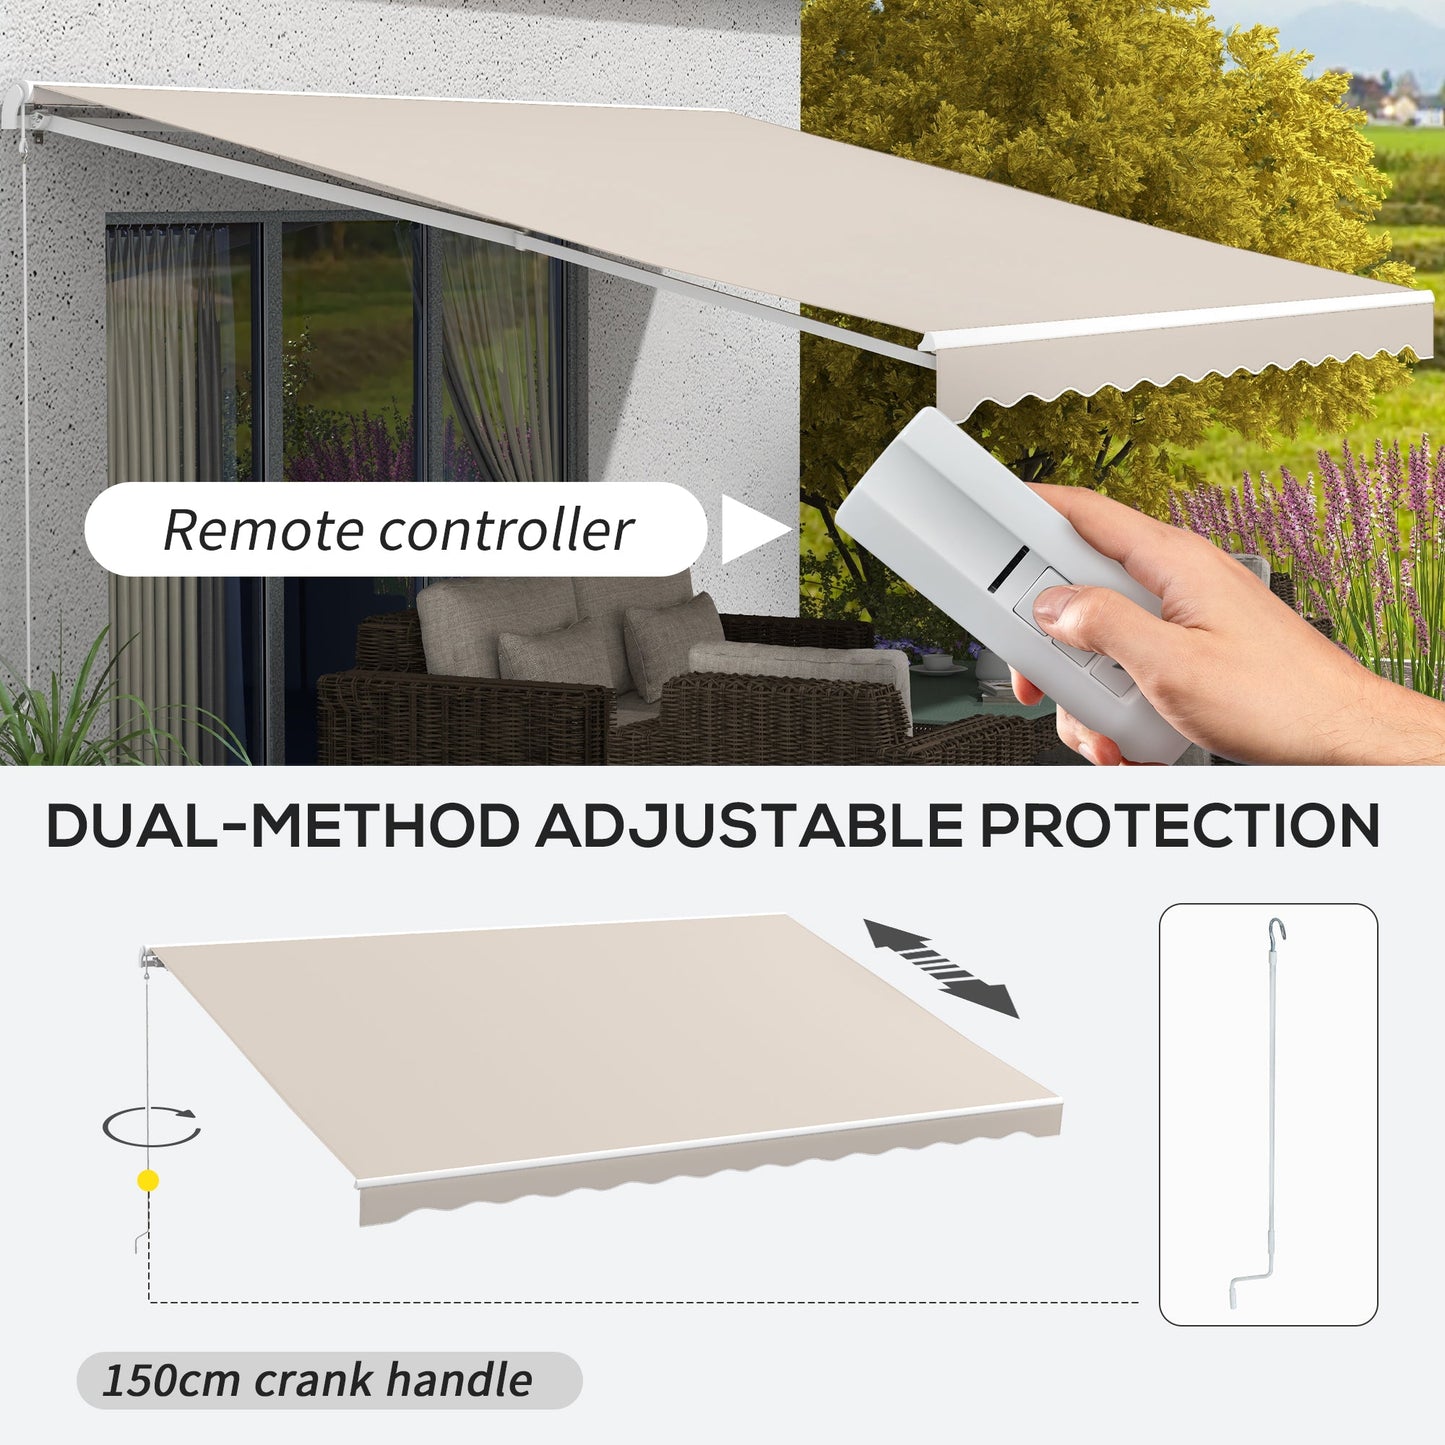 -Outsunny 16'x10' Electric Retractable Awning Sunshade Shelter with Remote Controller, Crank Handle for Deck Balcony Yard, Cream - Outdoor Style Company